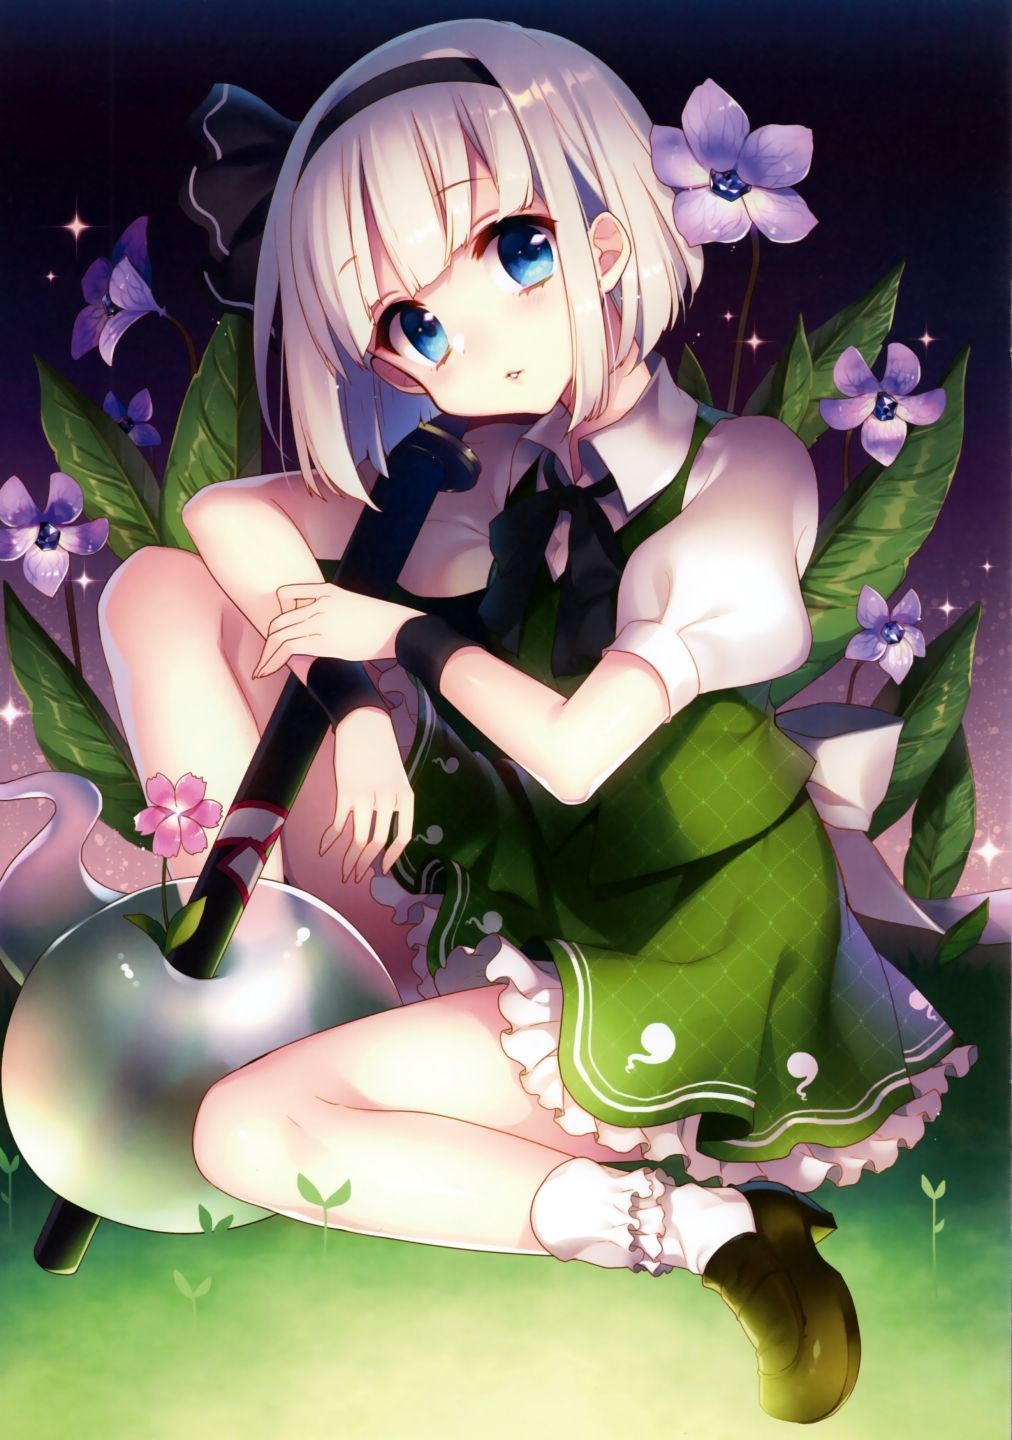 【Erotic Image】Character image of Soul Youmu who wants to refer to erotic cosplay of Toho Project 16